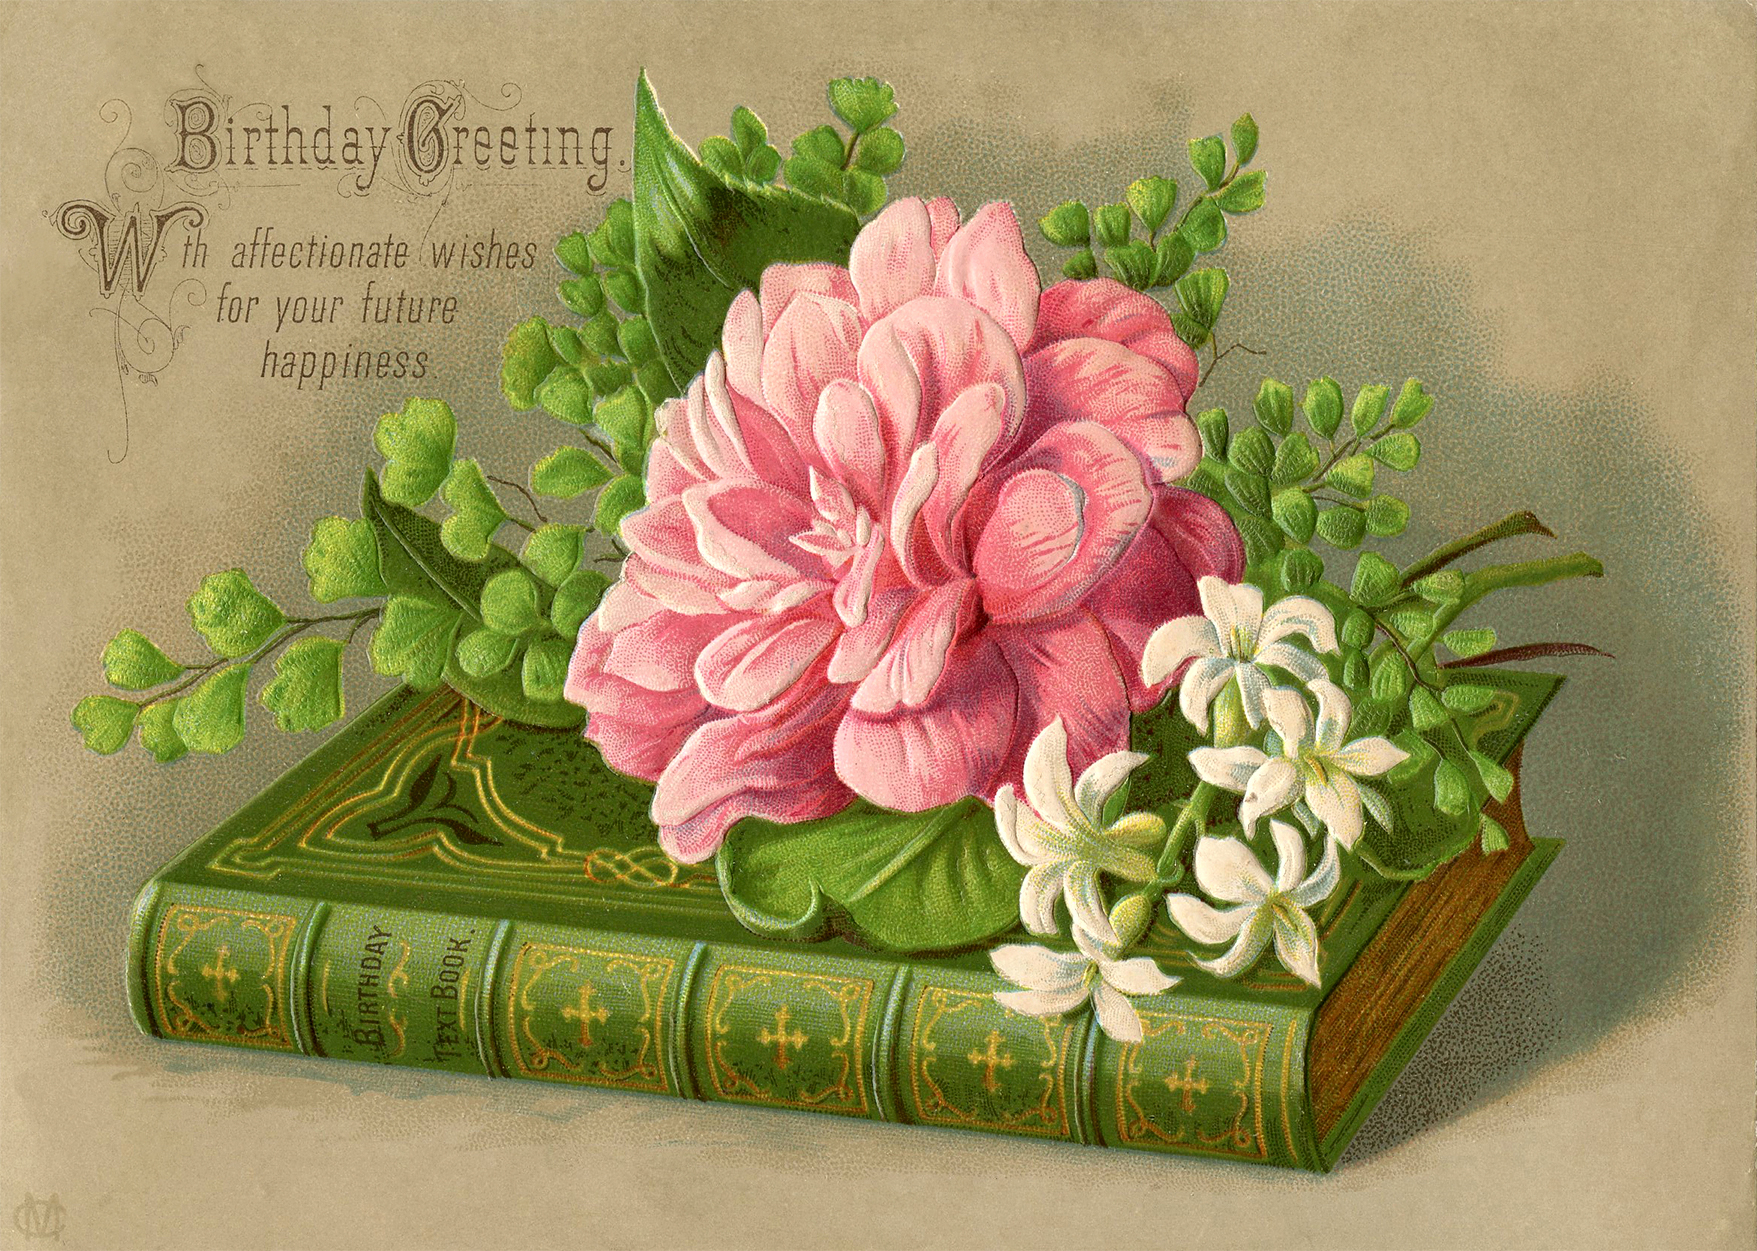 Vintage Birthday Image - Book - Flowers - The Graphics Fairy